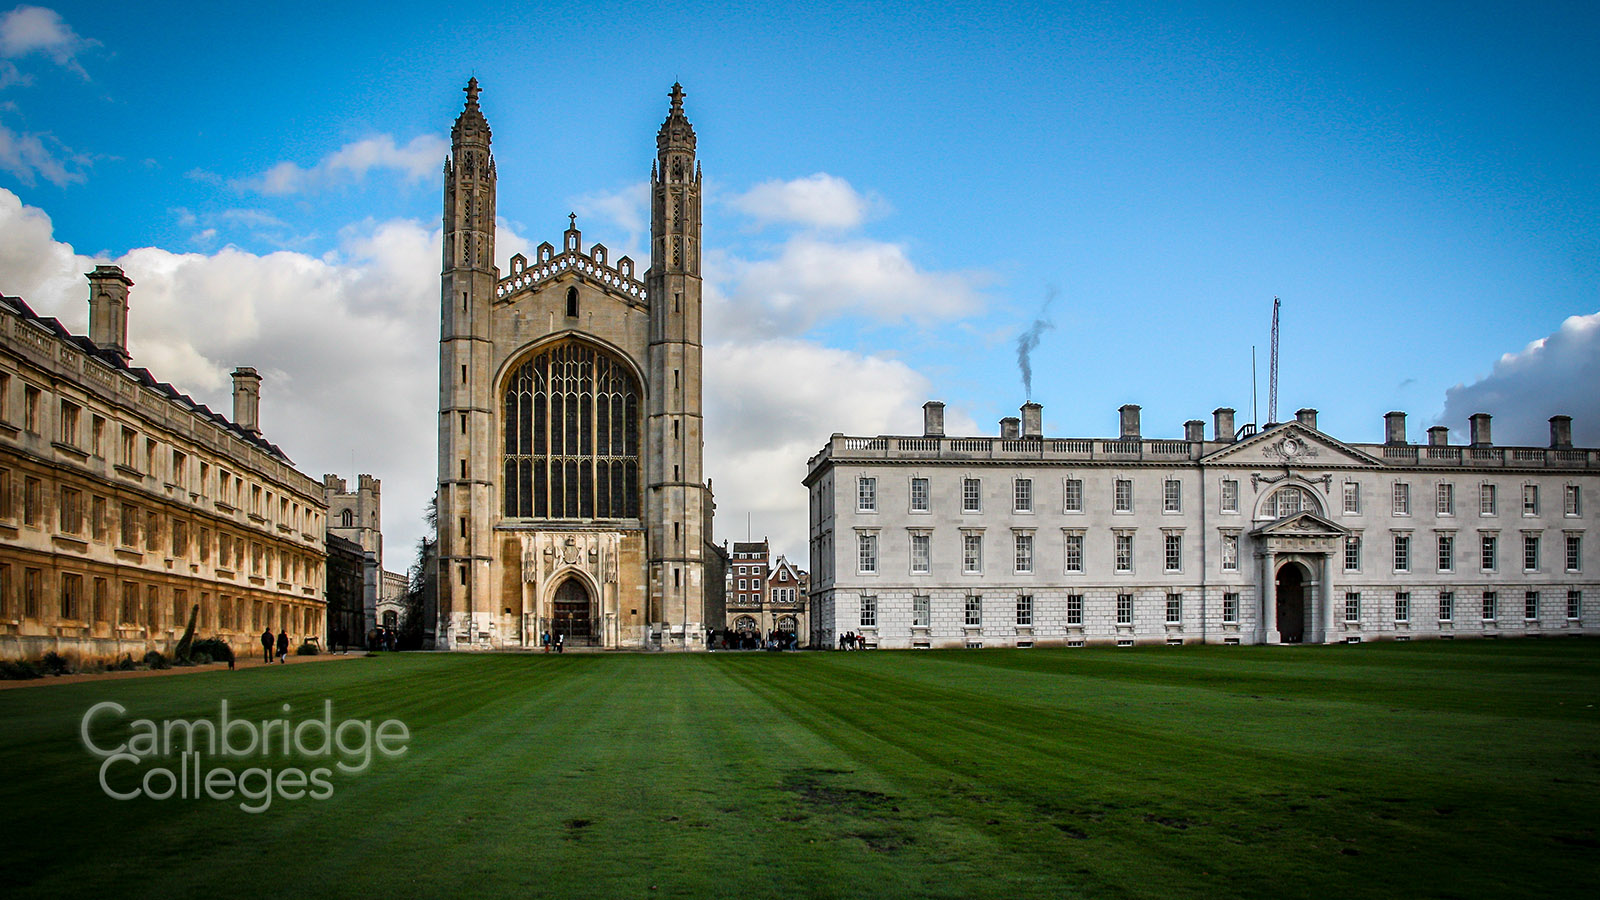 A view of King's college from the backs, with Clare college to the left of the chapel and the Gibbs building to the right